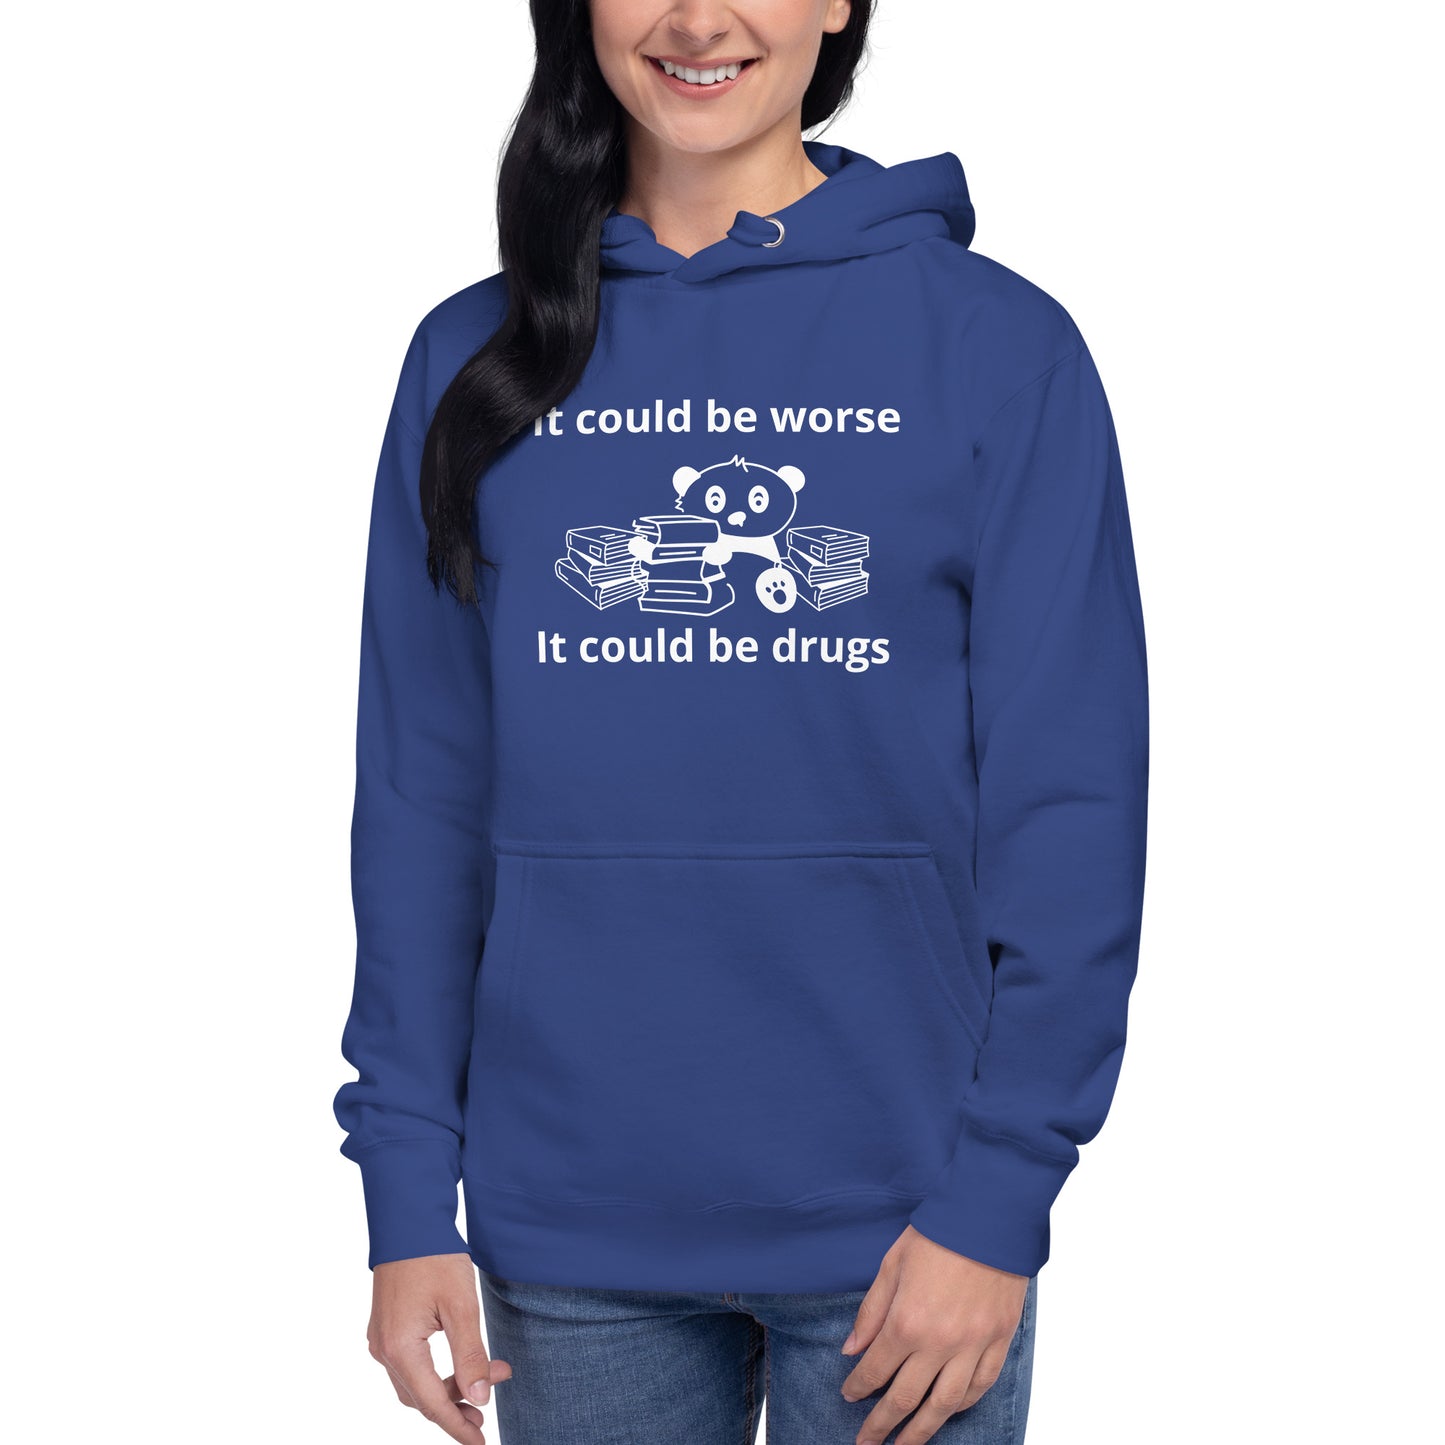 It could be worse Unisex Hoodie